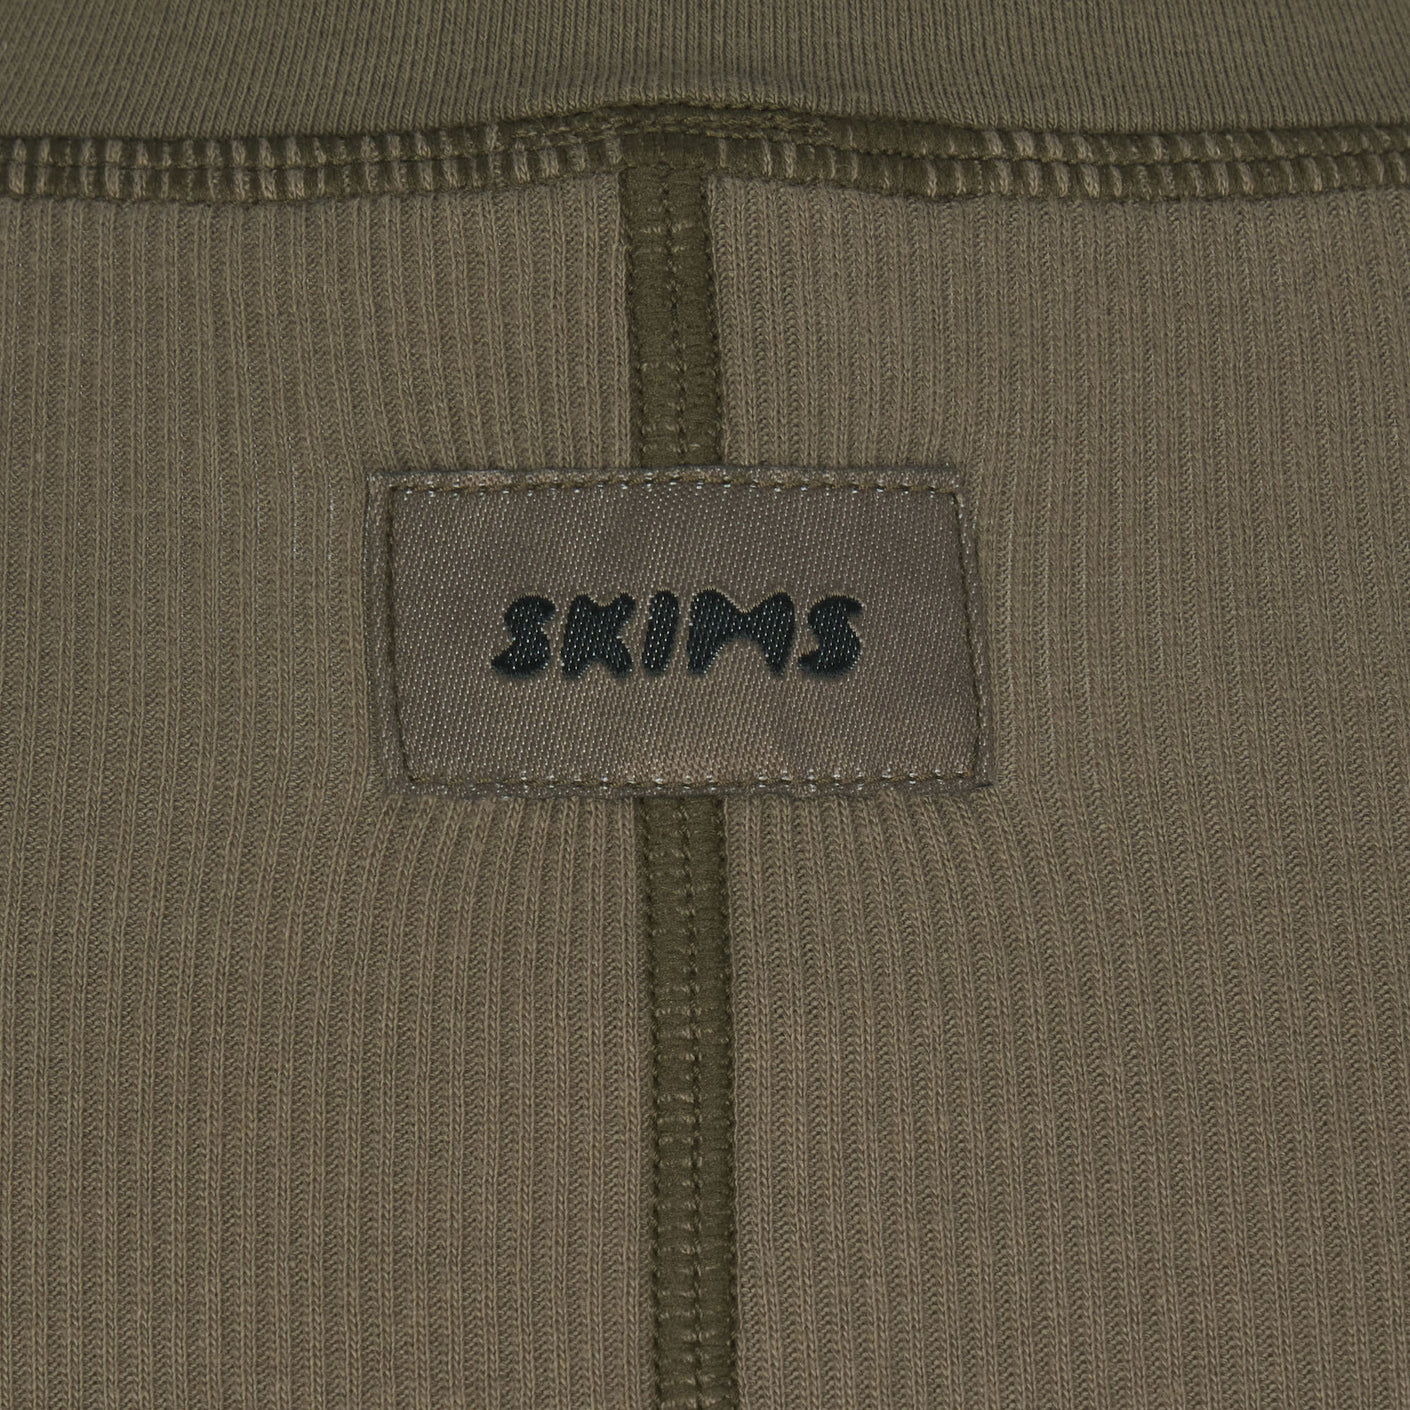 SKIMS - Bring on the heat this Spring in the brand-new Cotton Rib